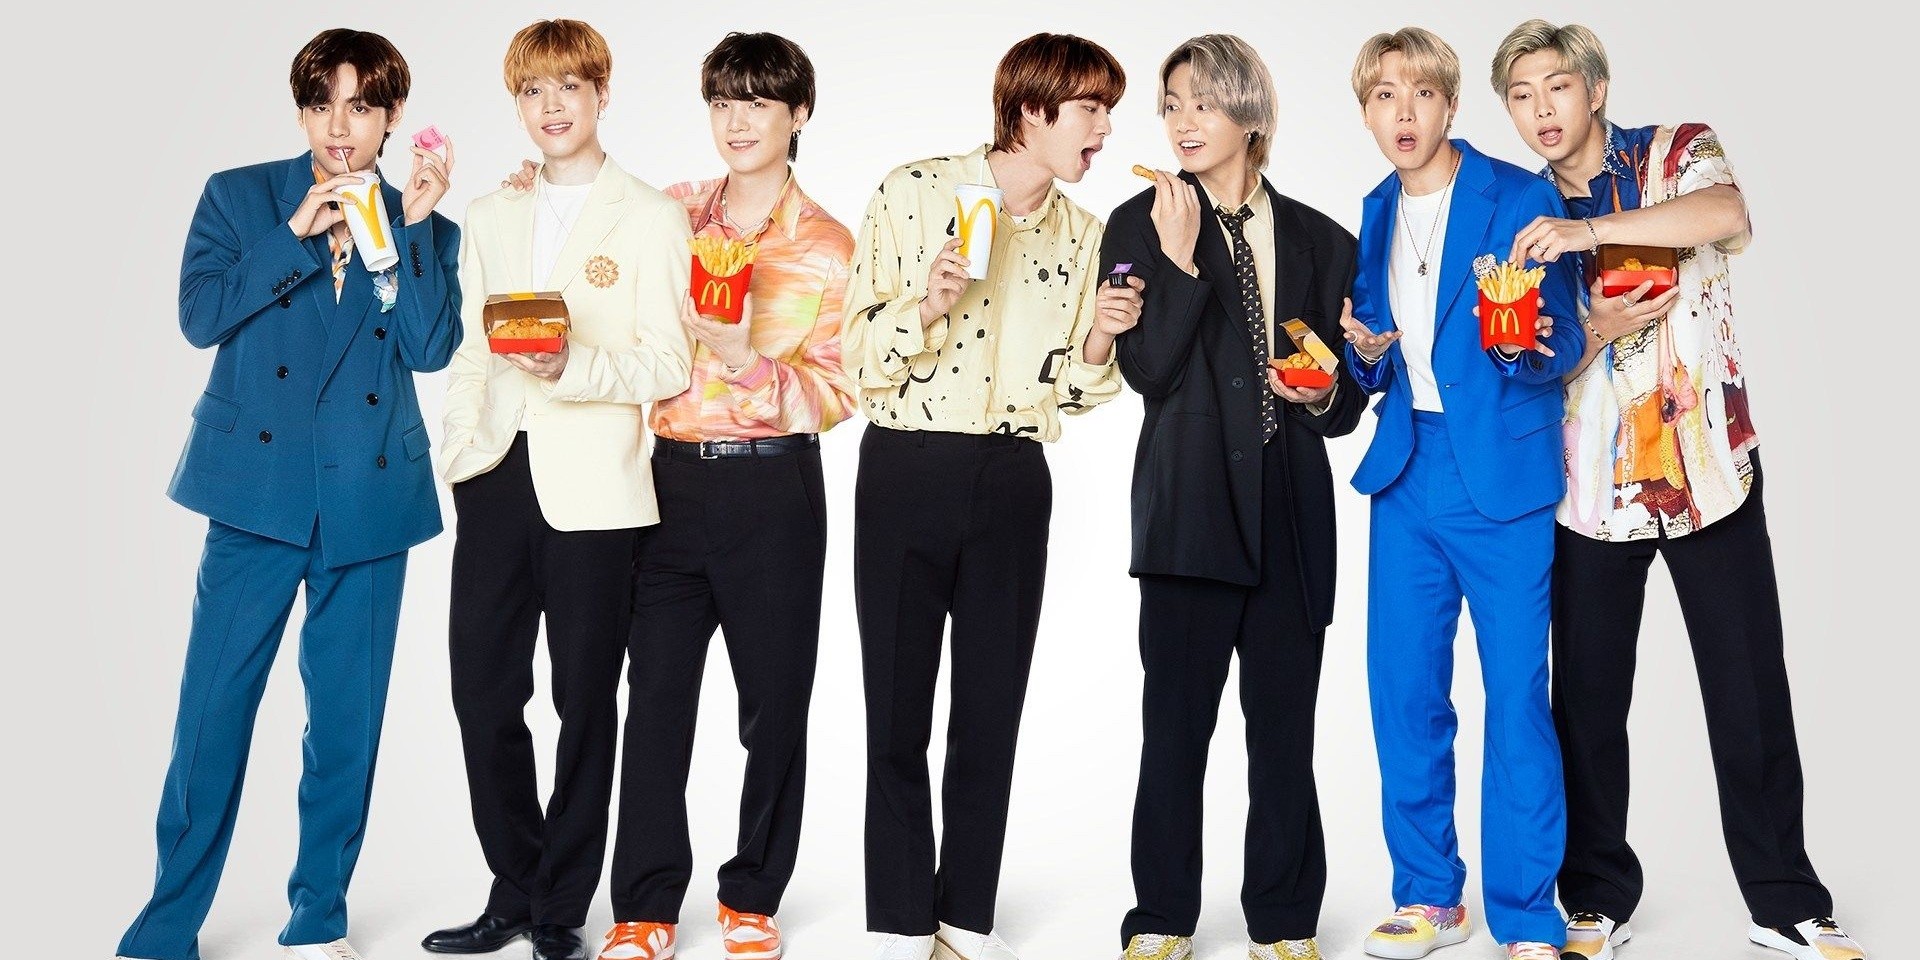 The BTS Meal is arriving in Singapore, only available via delivery: here's all you need to know